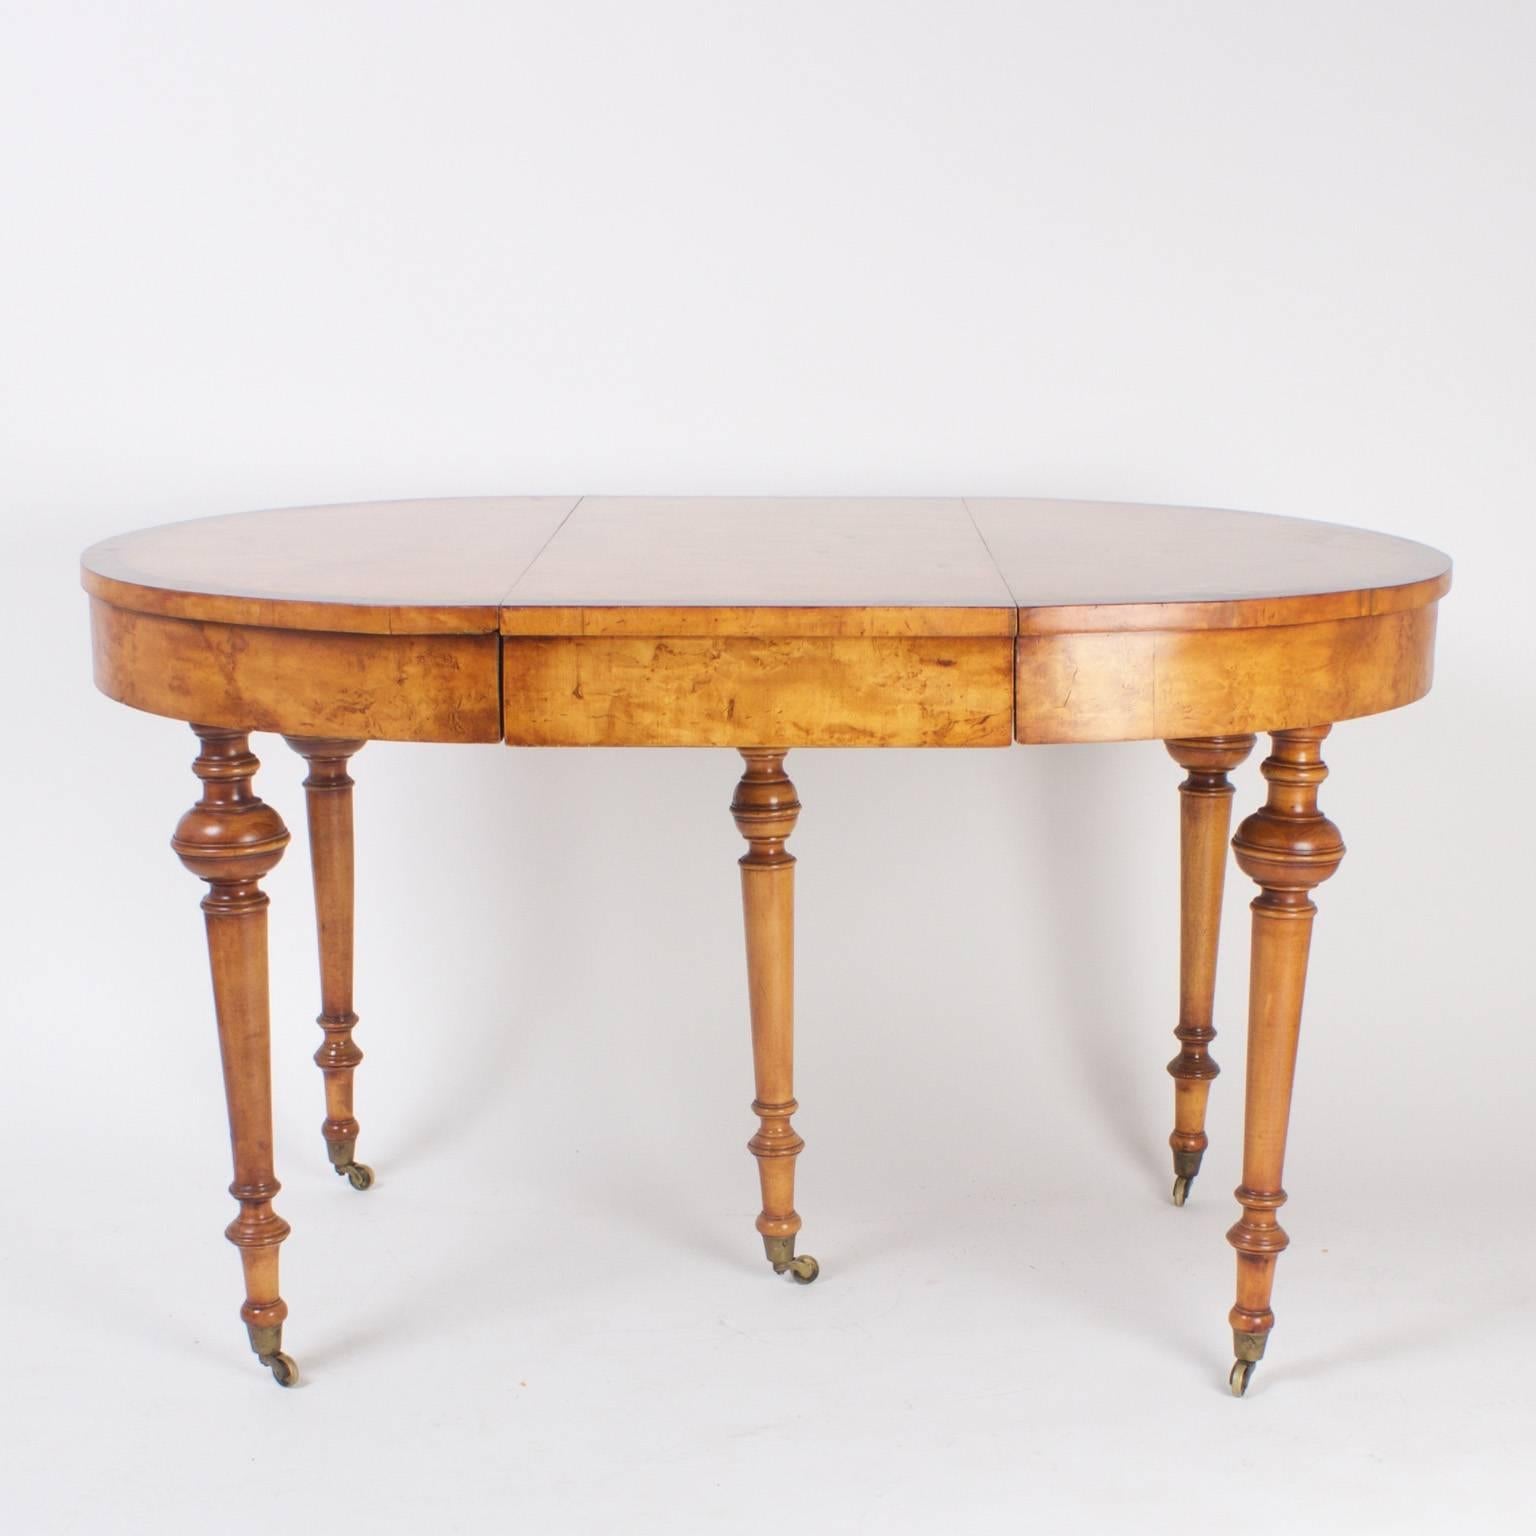 19th Century Napoleon III Expandable Dining Table with a Rare Burled Maple Top